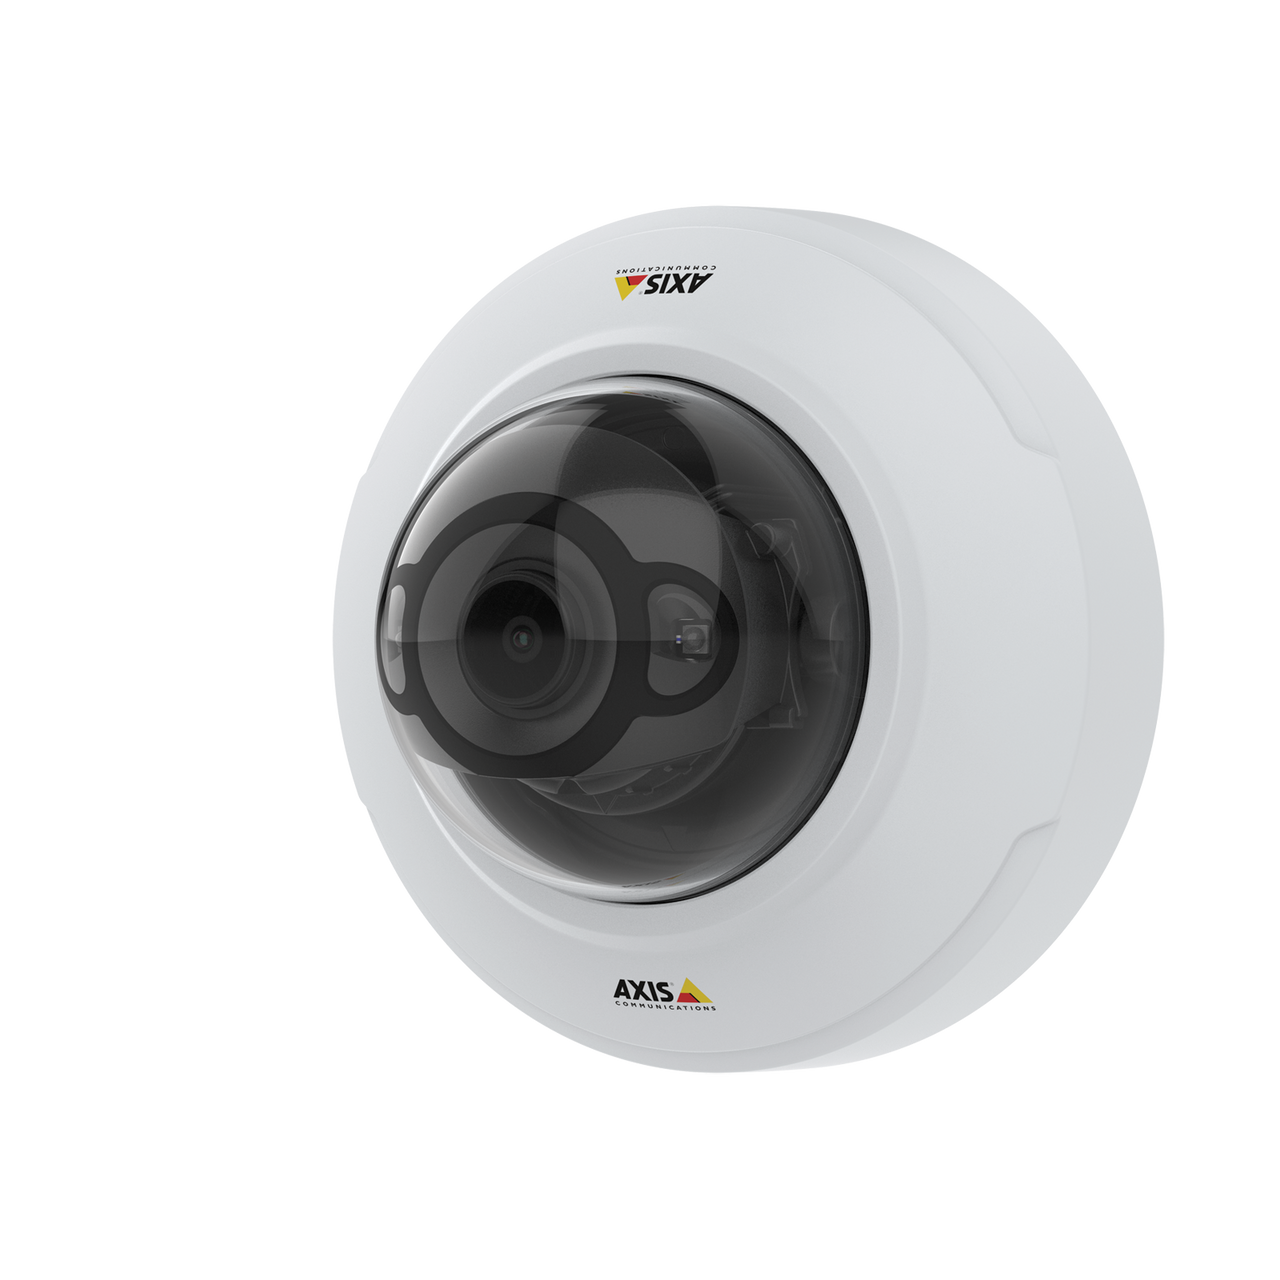 AXIS M4216-LV Varifocal 4 MP dome with IR and deep learning